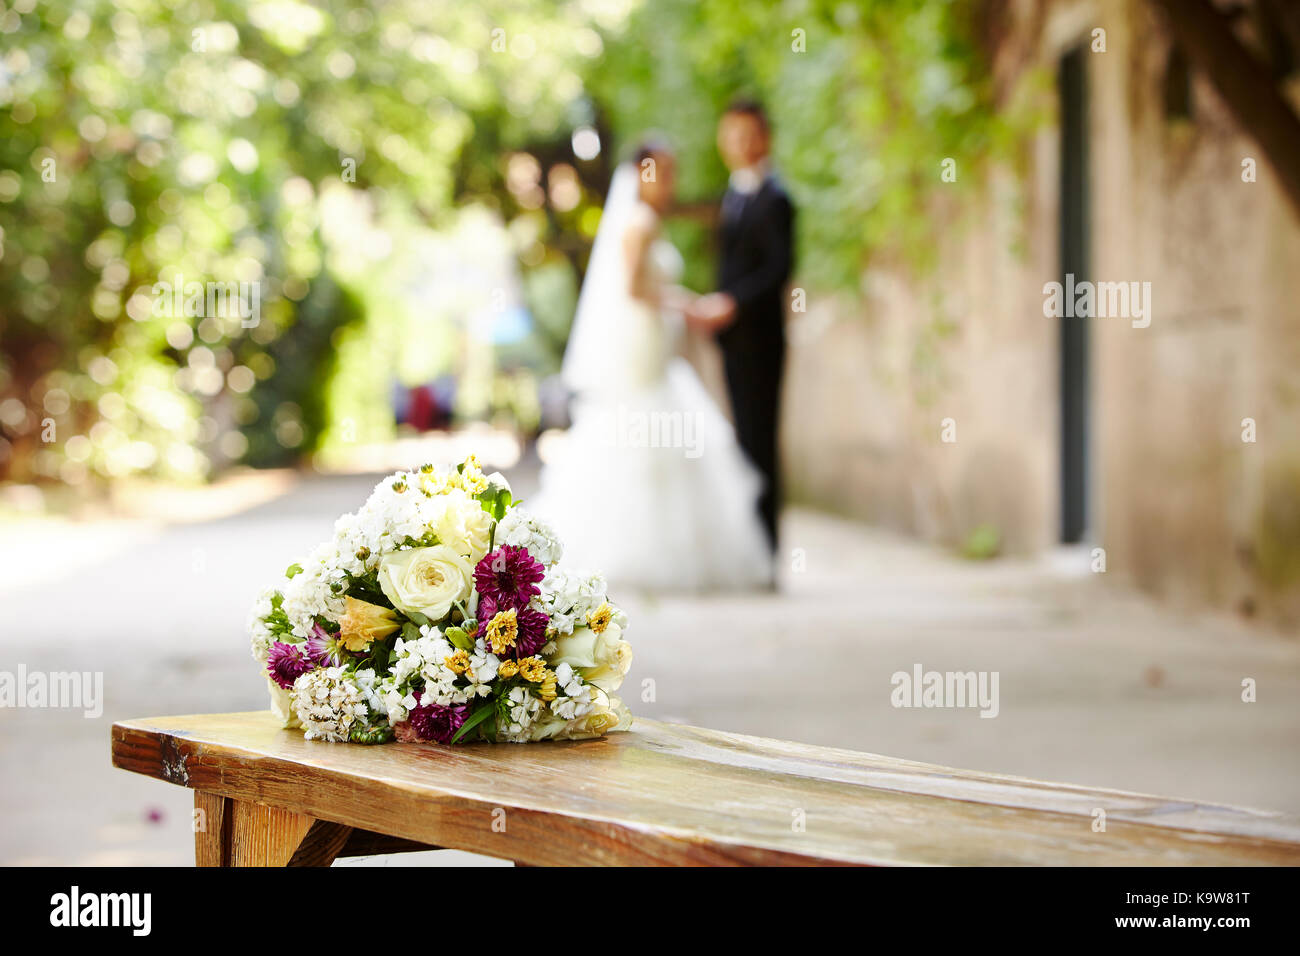 bouquet on wooden bench with bride and groom in the background, focus on the flowers. Stock Photo